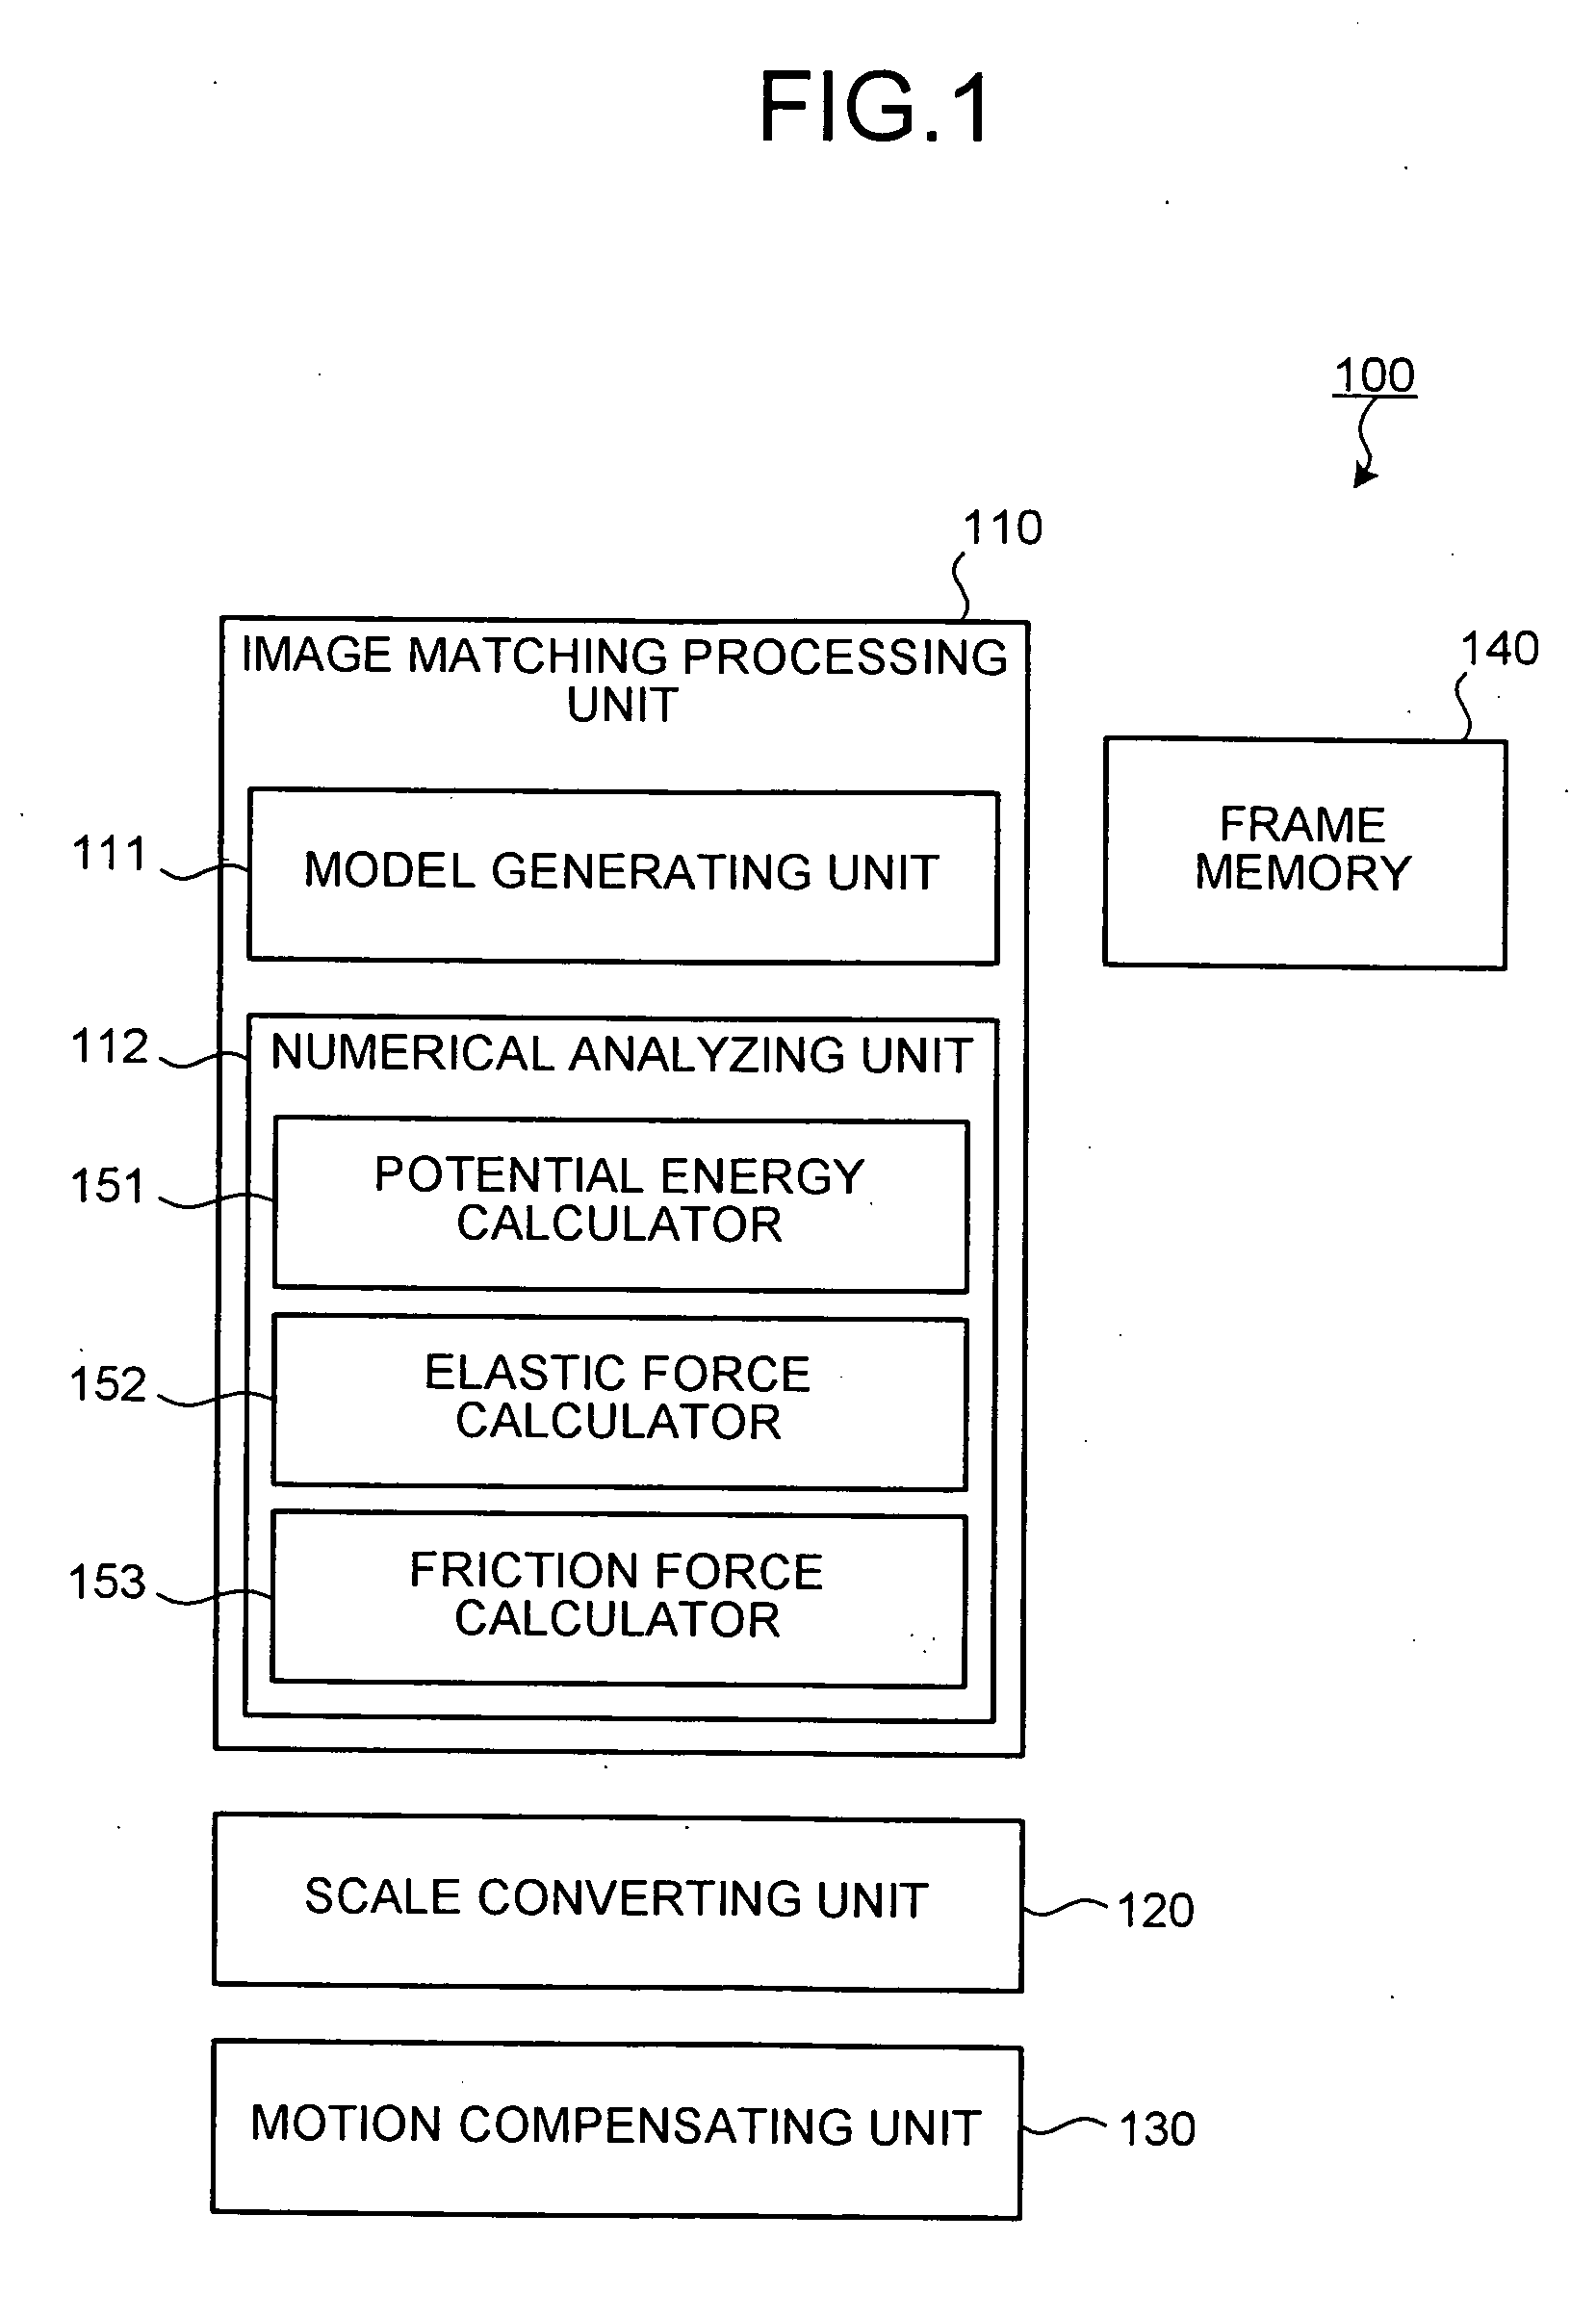 Image matching apparatus, method of matching images, and computer program product